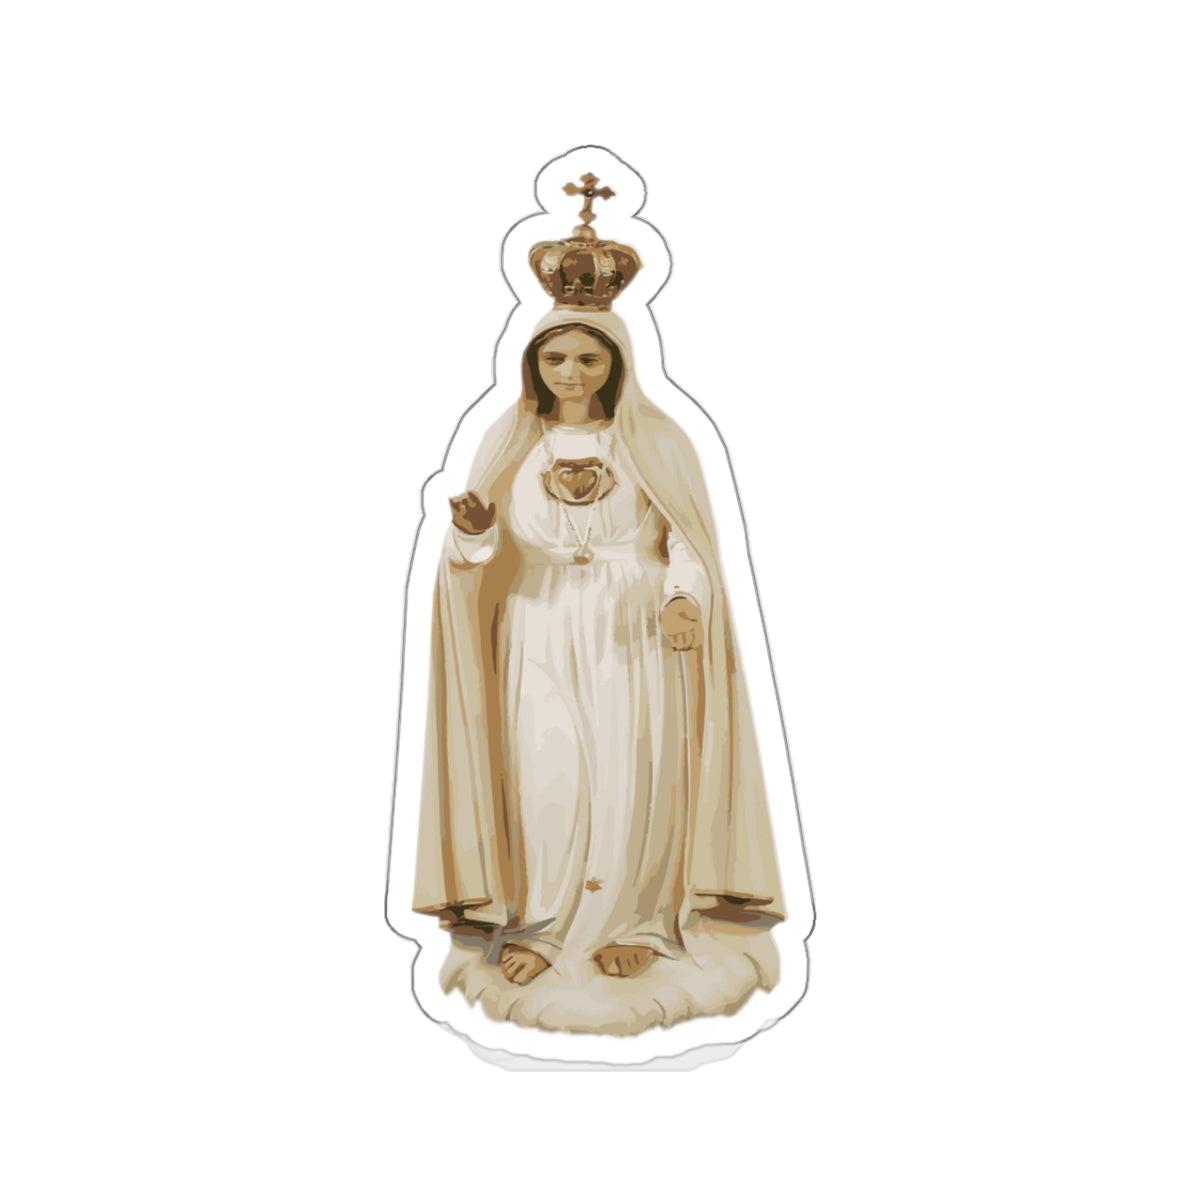 Our Lady of Fatima Kiss-Cut Stickers